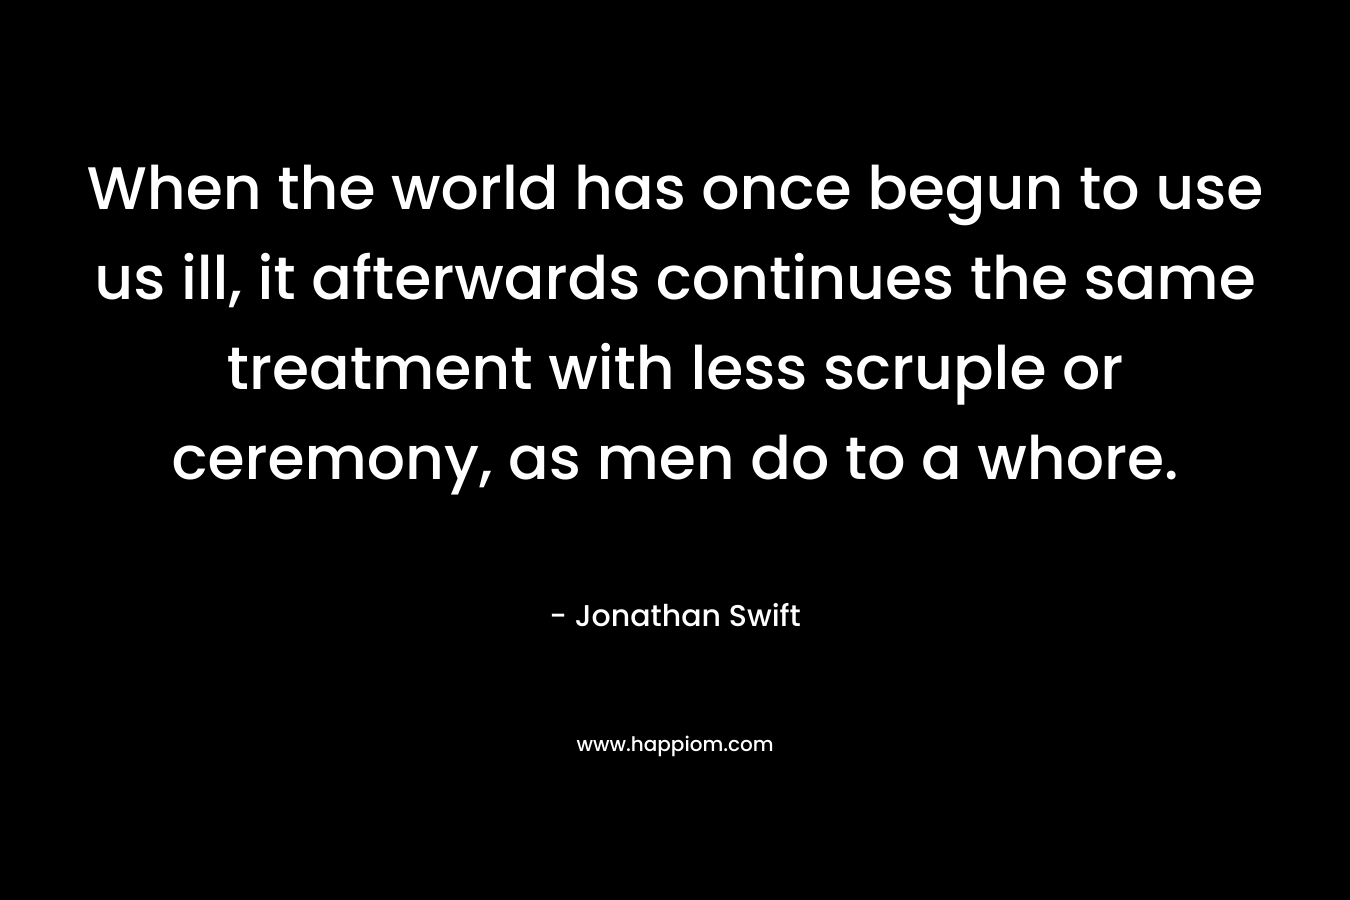 When the world has once begun to use us ill, it afterwards continues the same treatment with less scruple or ceremony, as men do to a whore. – Jonathan Swift